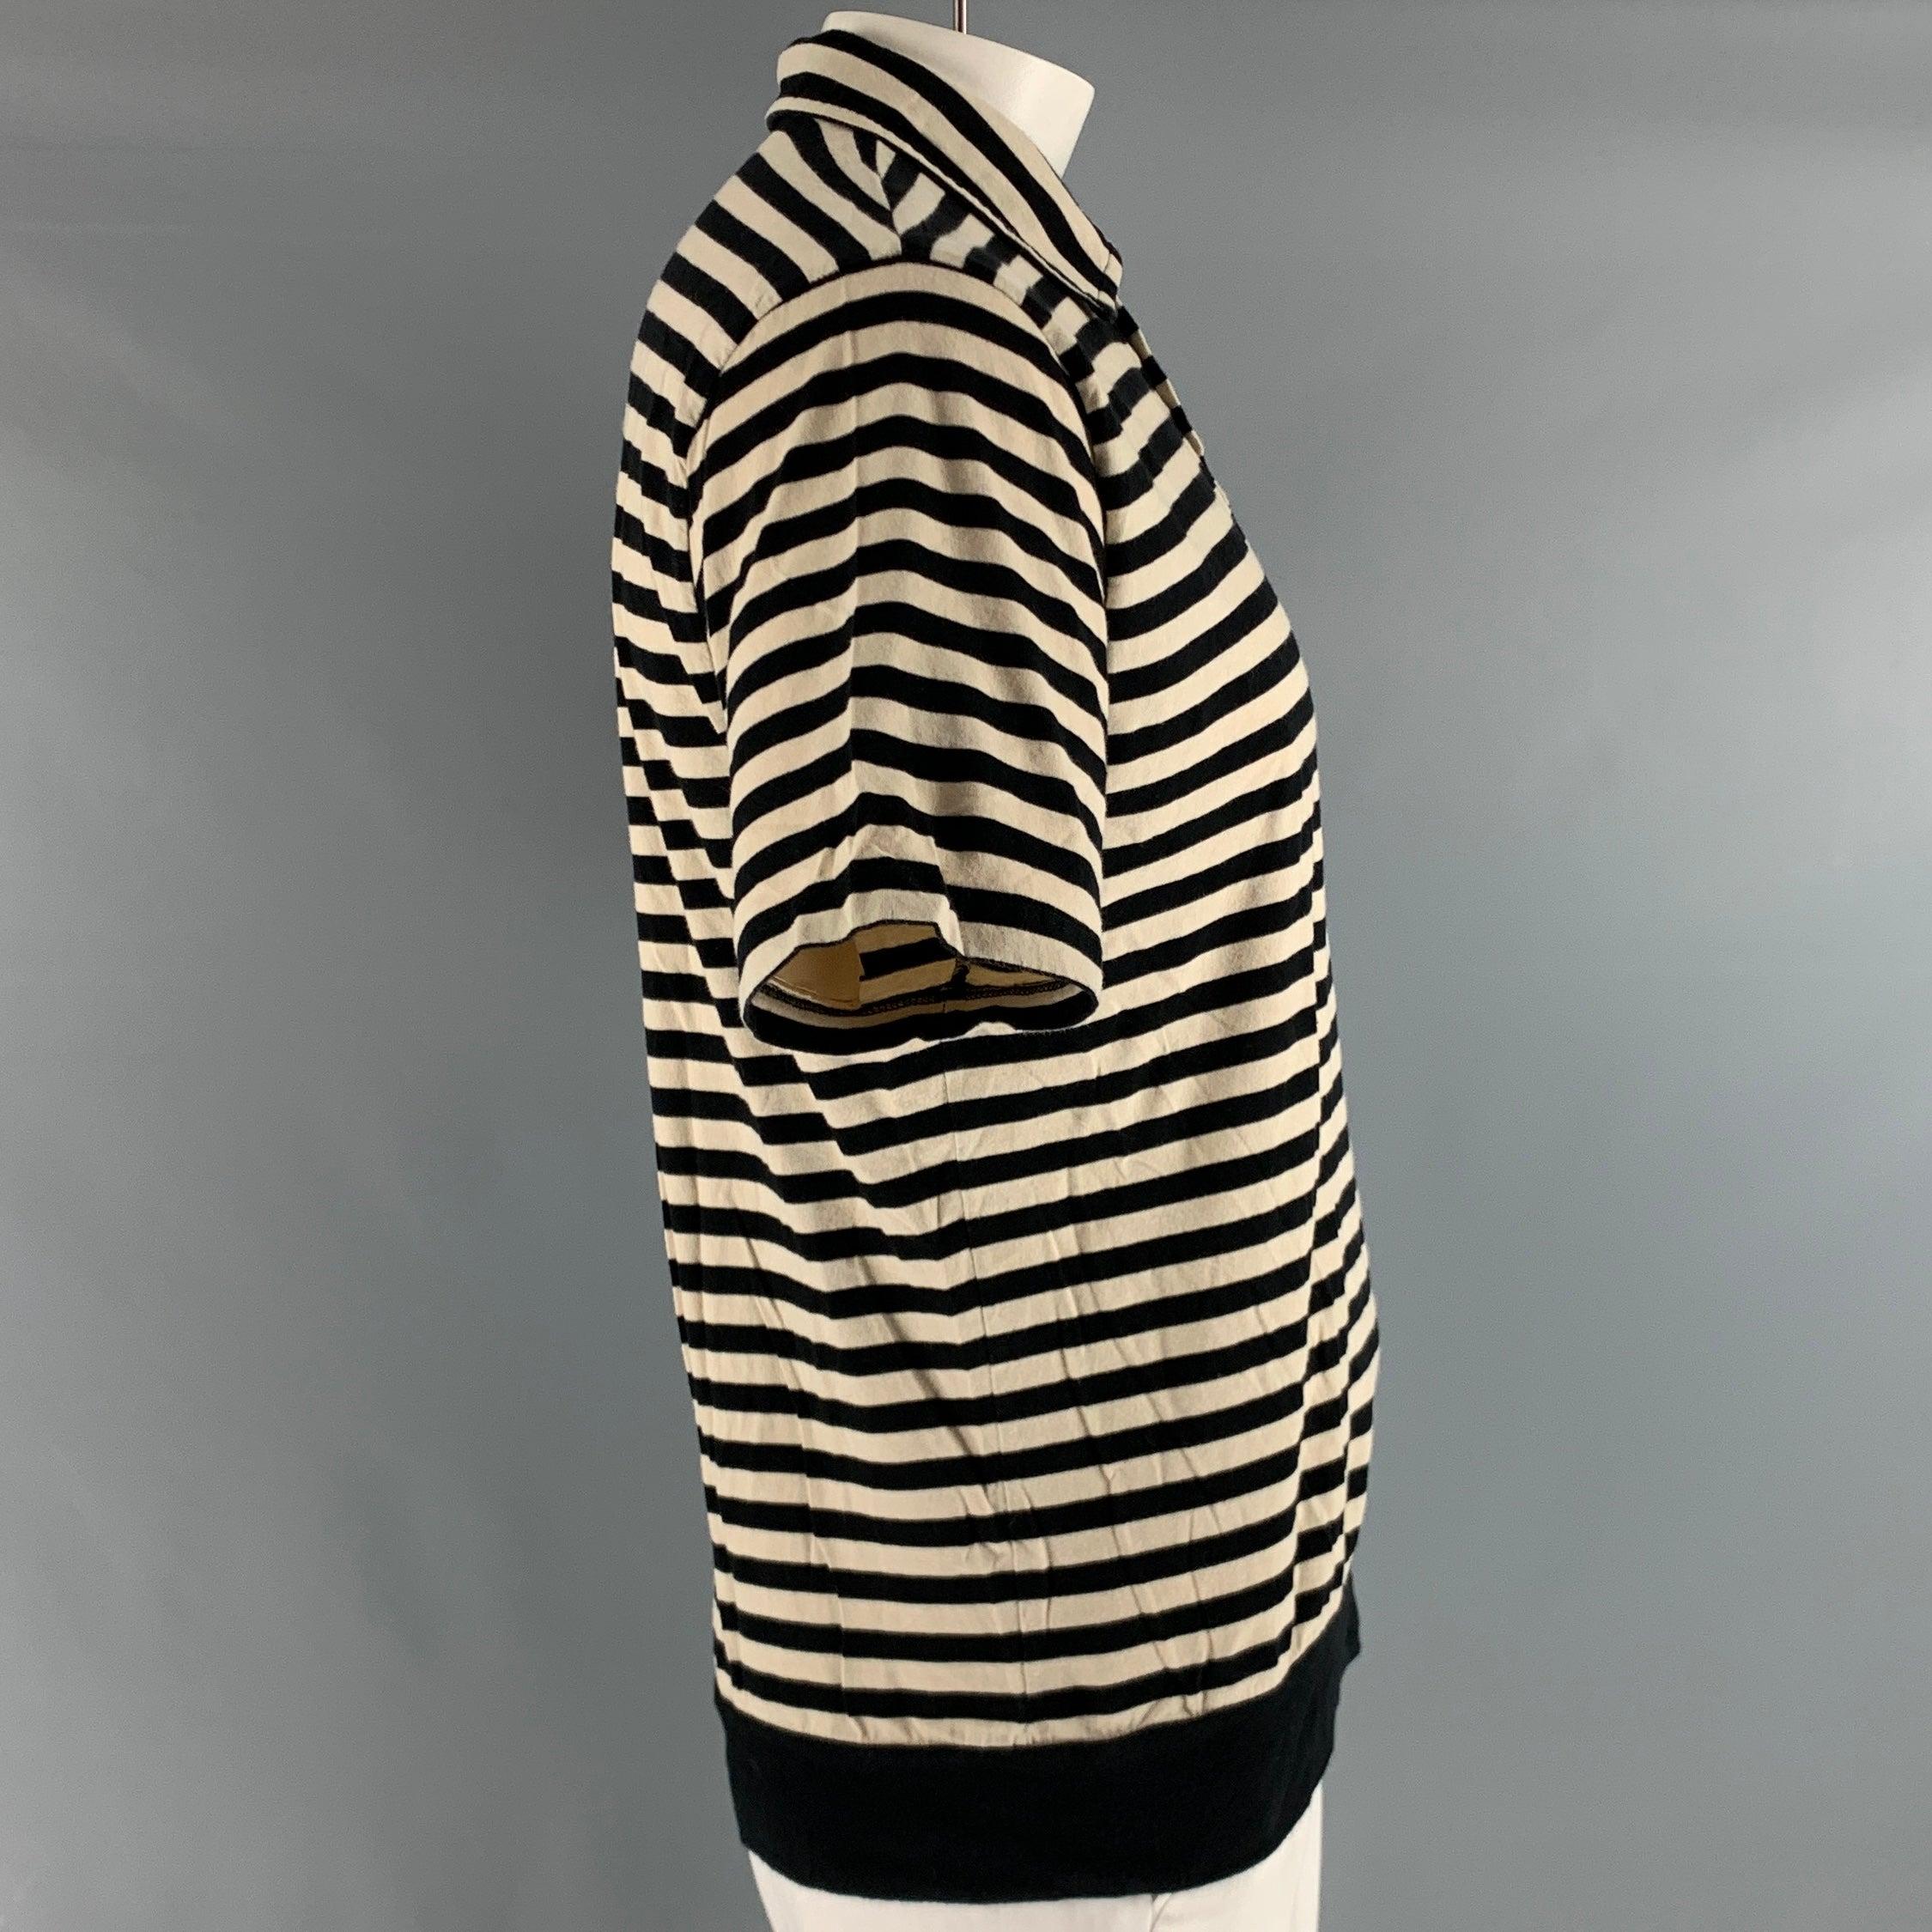 DRIES VAN NOTEN polo in a black and white jersey cotton knit material featuring horizontal stripe pattern, and half placket button closure.Very Good Pre-Owned Condition. Minor pilling. 

Marked:   XL 

Measurements: 
 
Shoulder: 19 inches Chest: 48